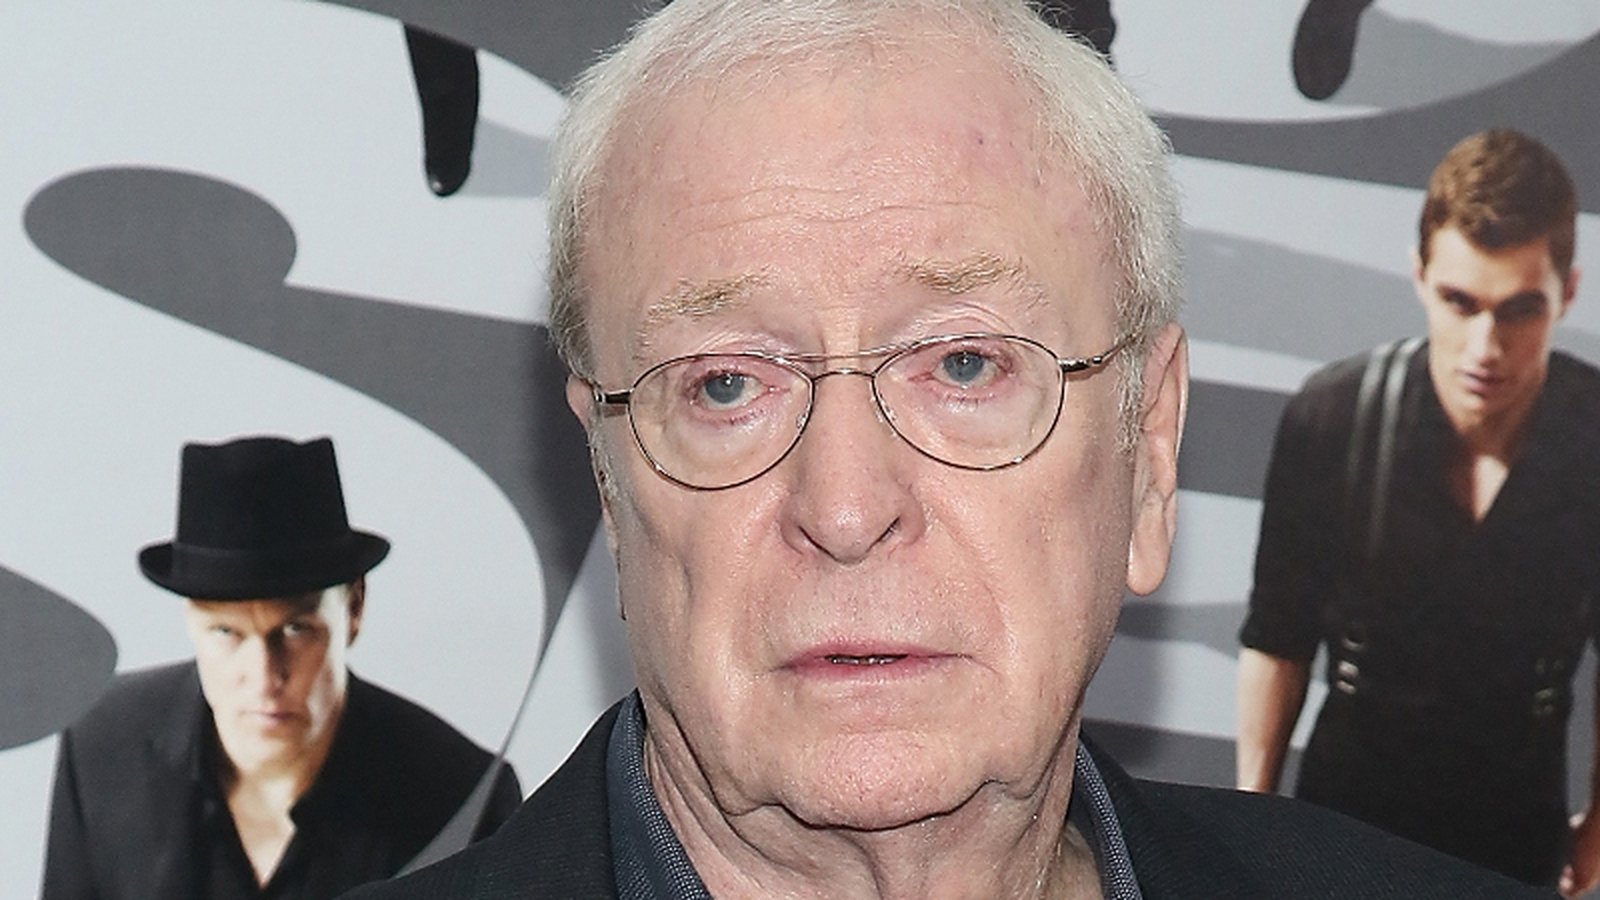 Michael Caine says he'll retire at 90